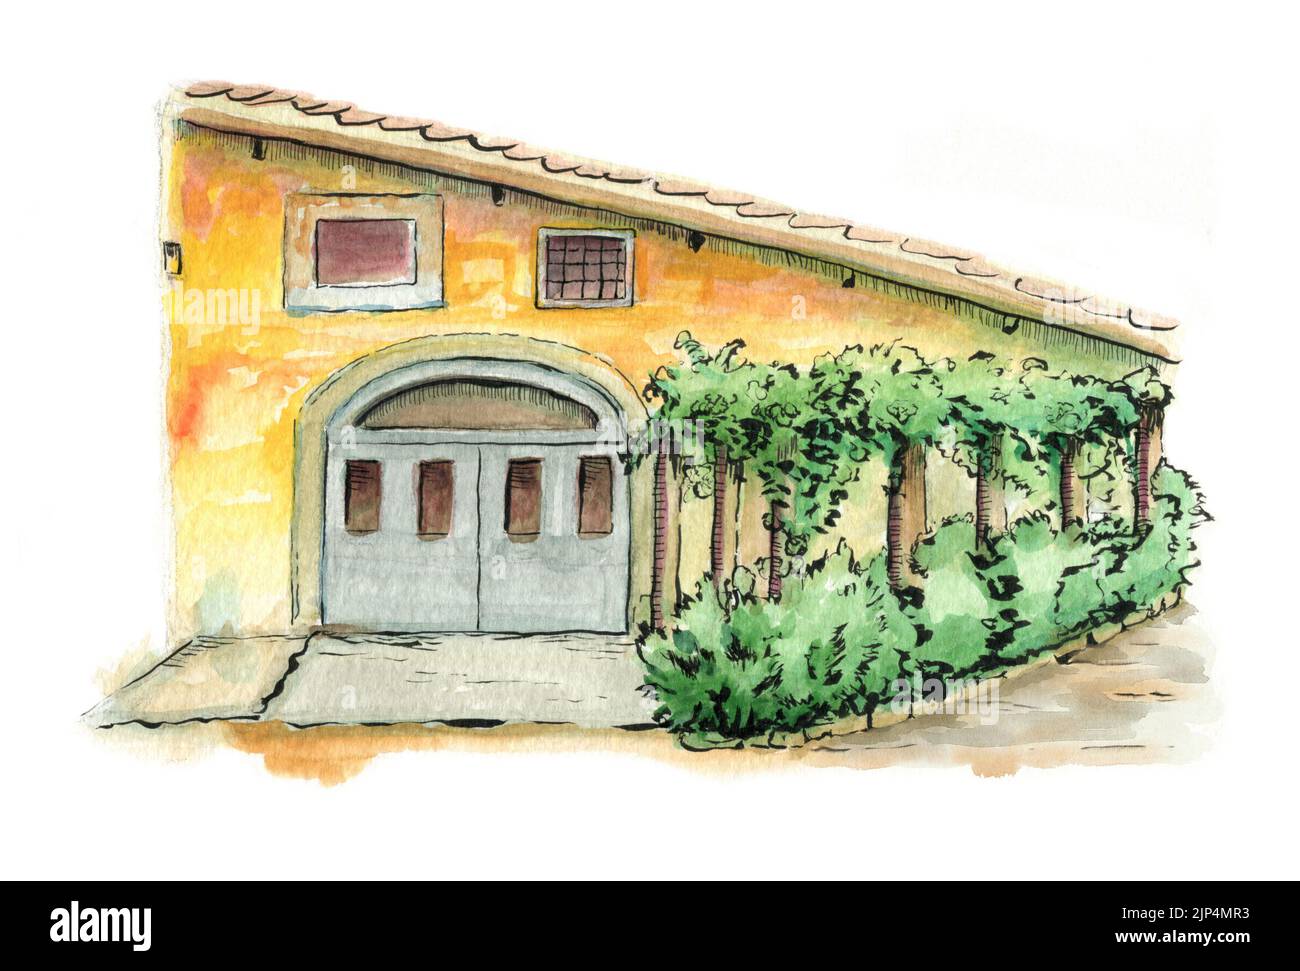 Front view of a rural building. Original watercolor on paper. Stock Photo